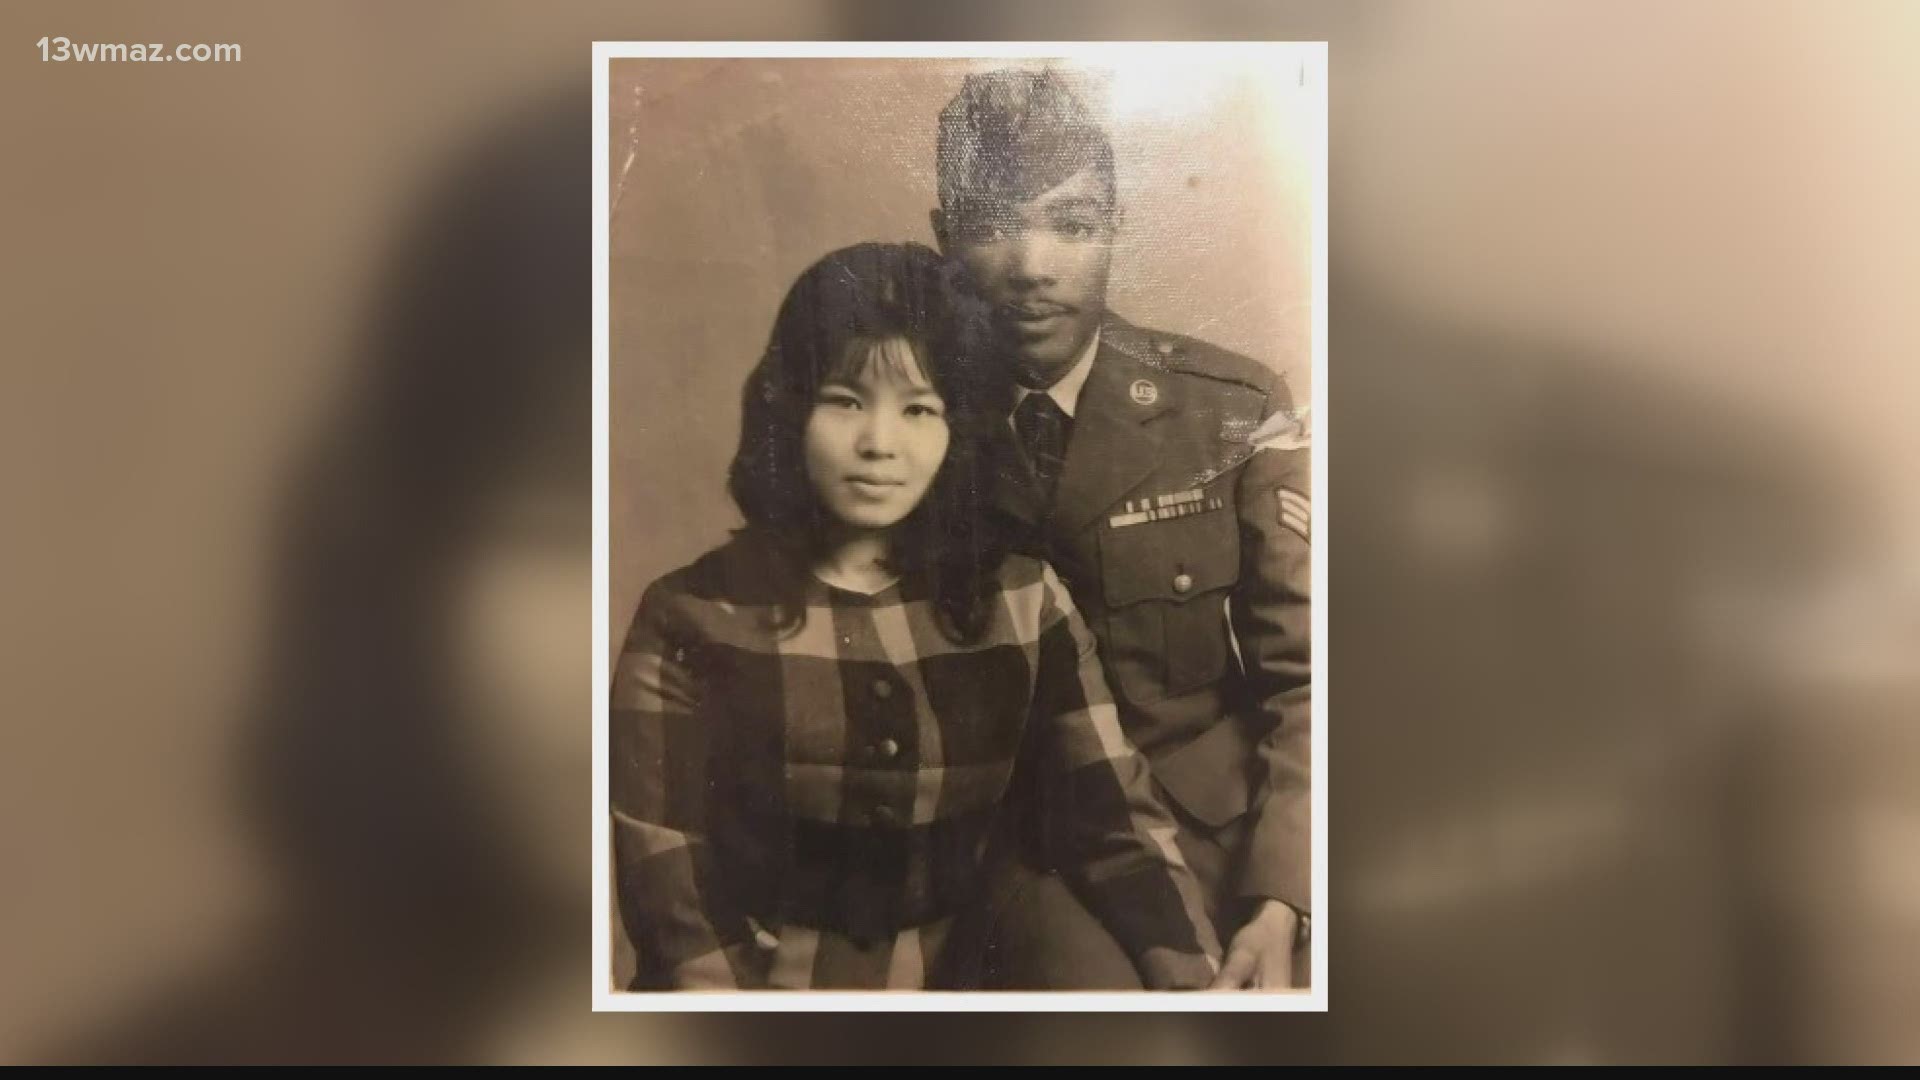 He served across the world and even went to Vietnam twice before landing back at the Dublin VA  in 2014.